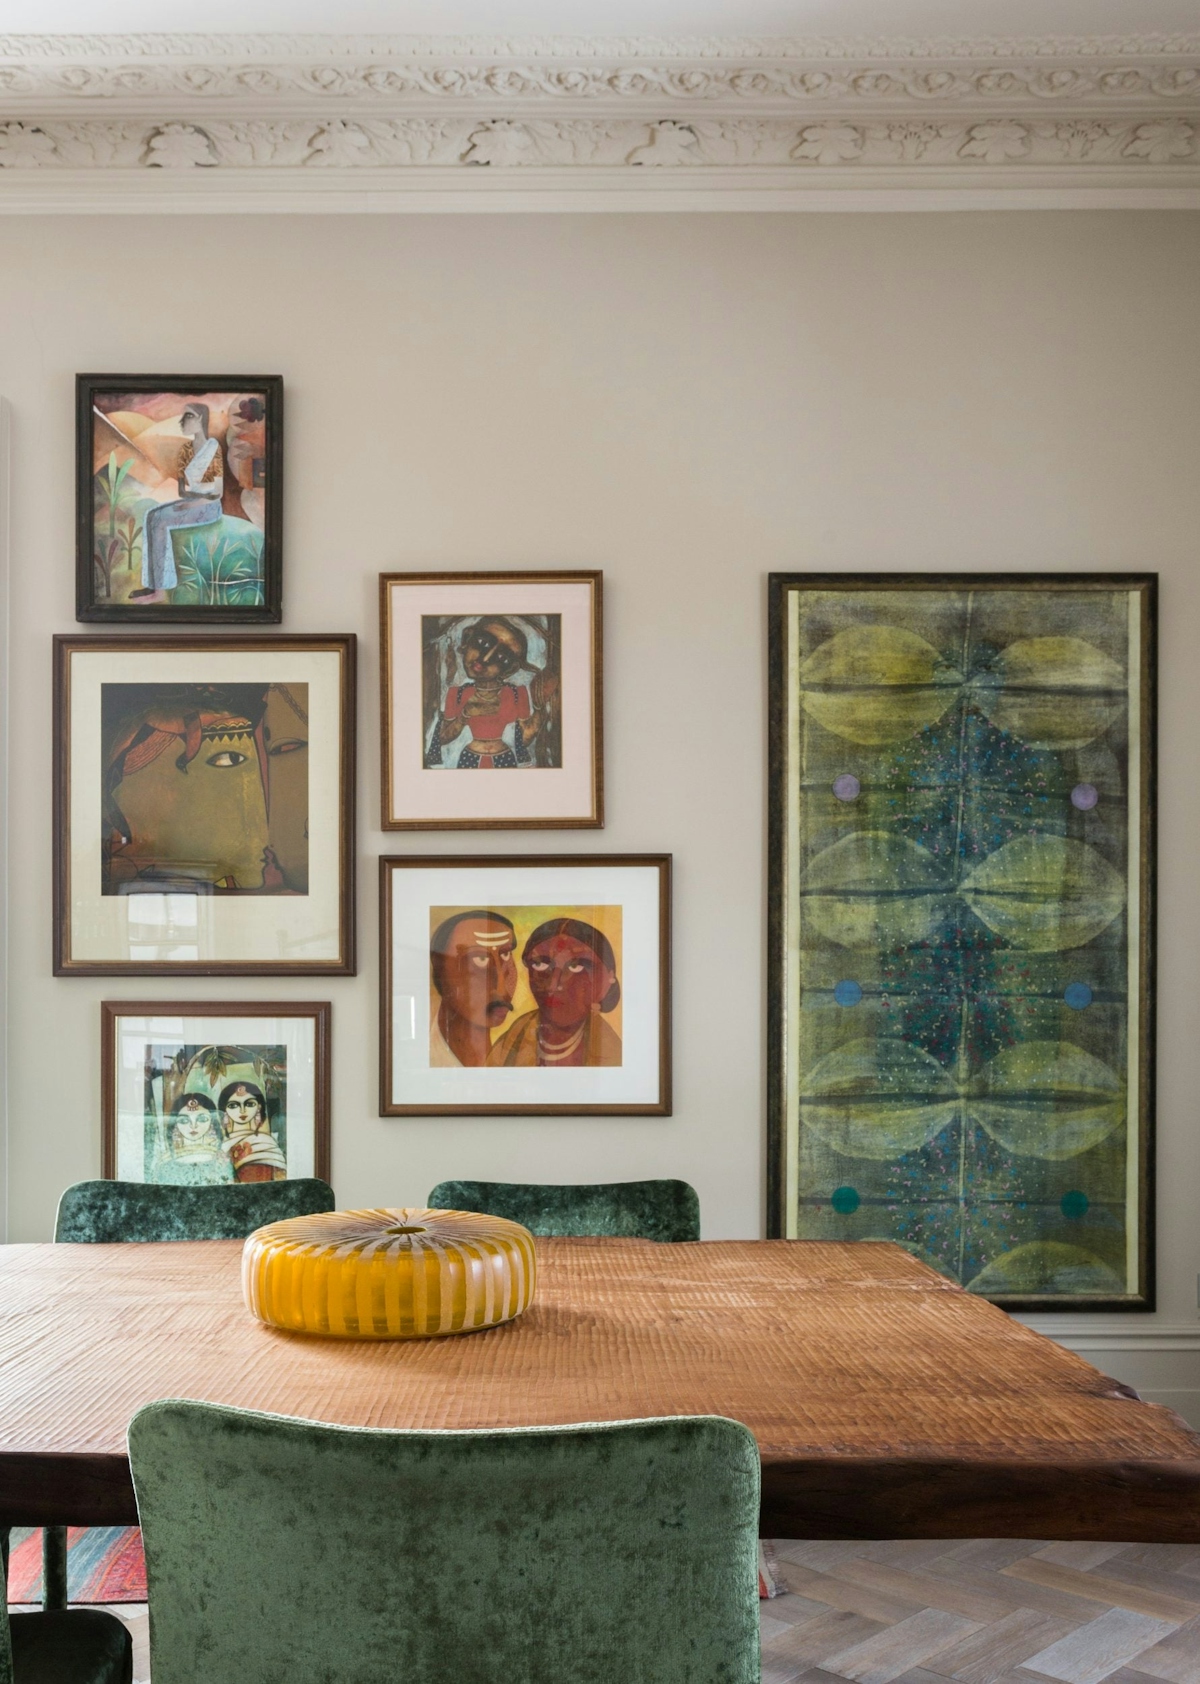 How To Frame Art | Shalini Misra | Shop art prints and art canvases luxury interiors online at LuxDeco.com